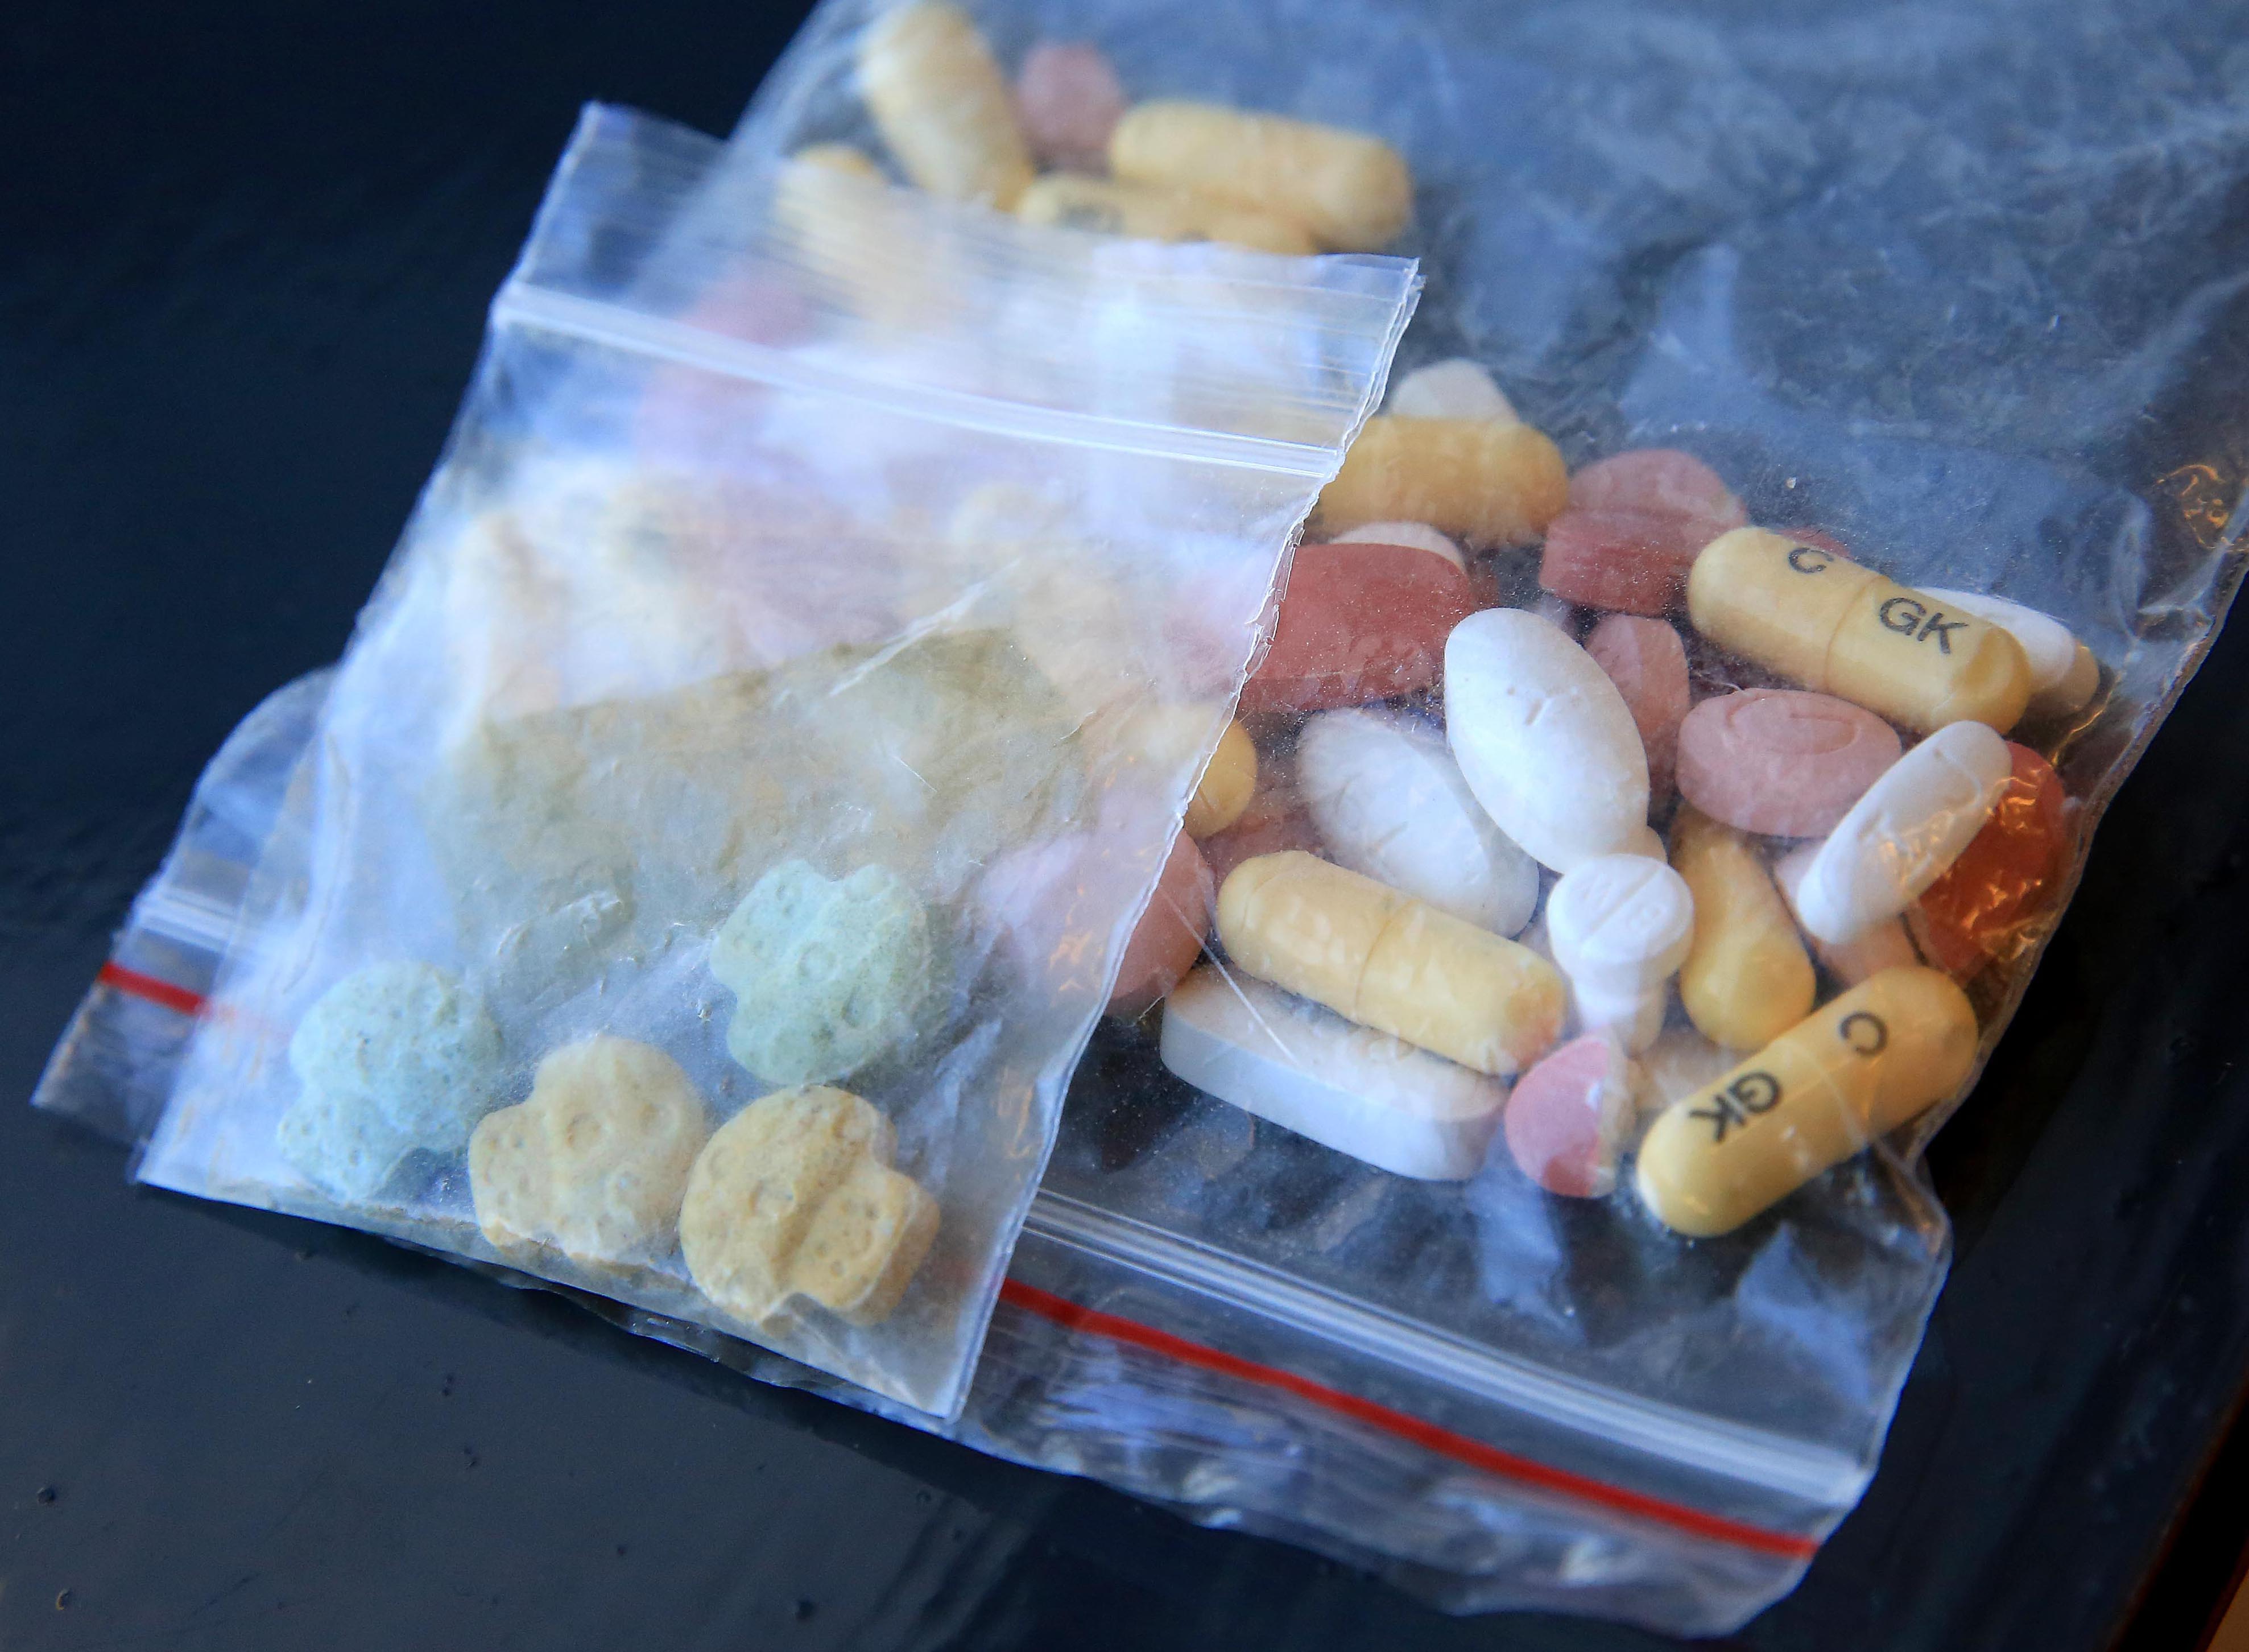 The bag of suspected ecstasy tablets was found in West Belfast on Monday along with a bag of prescription medications – both were handed to IRSP representatives.